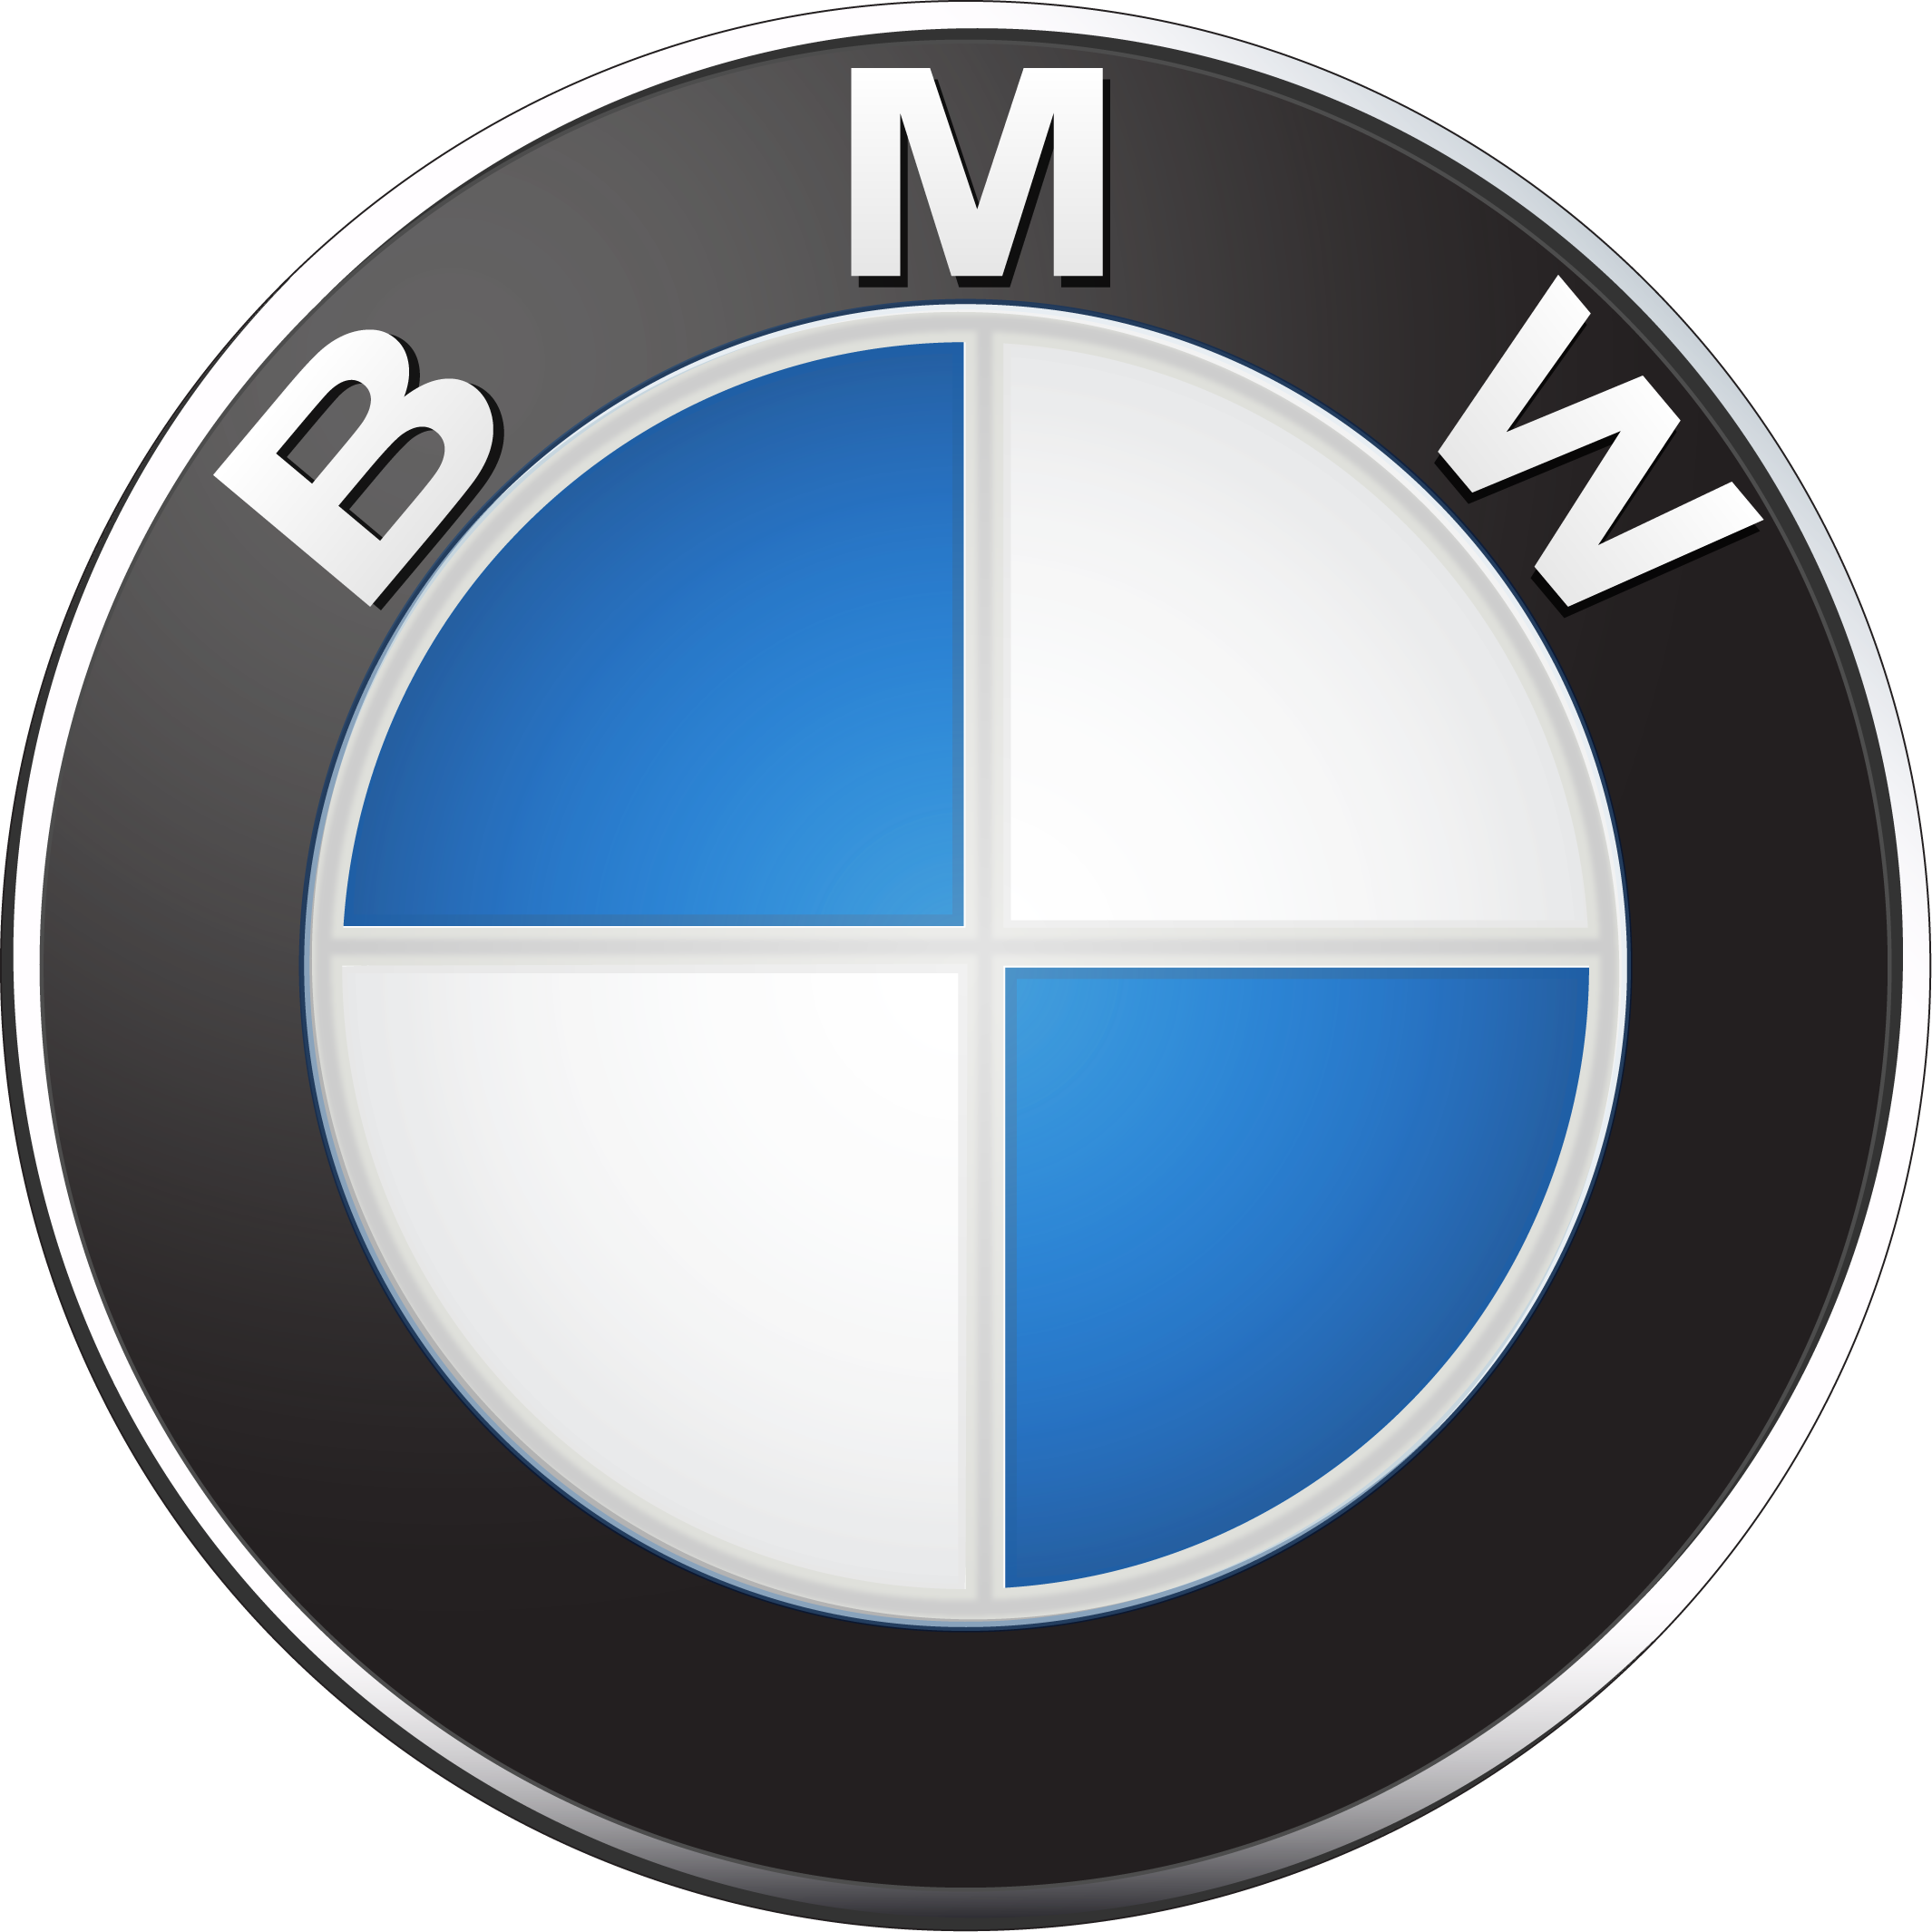 Bmw Logo Png Transparent - Bmw Sheer Driving Pleasure Ai PNG Image With  Transparent Background